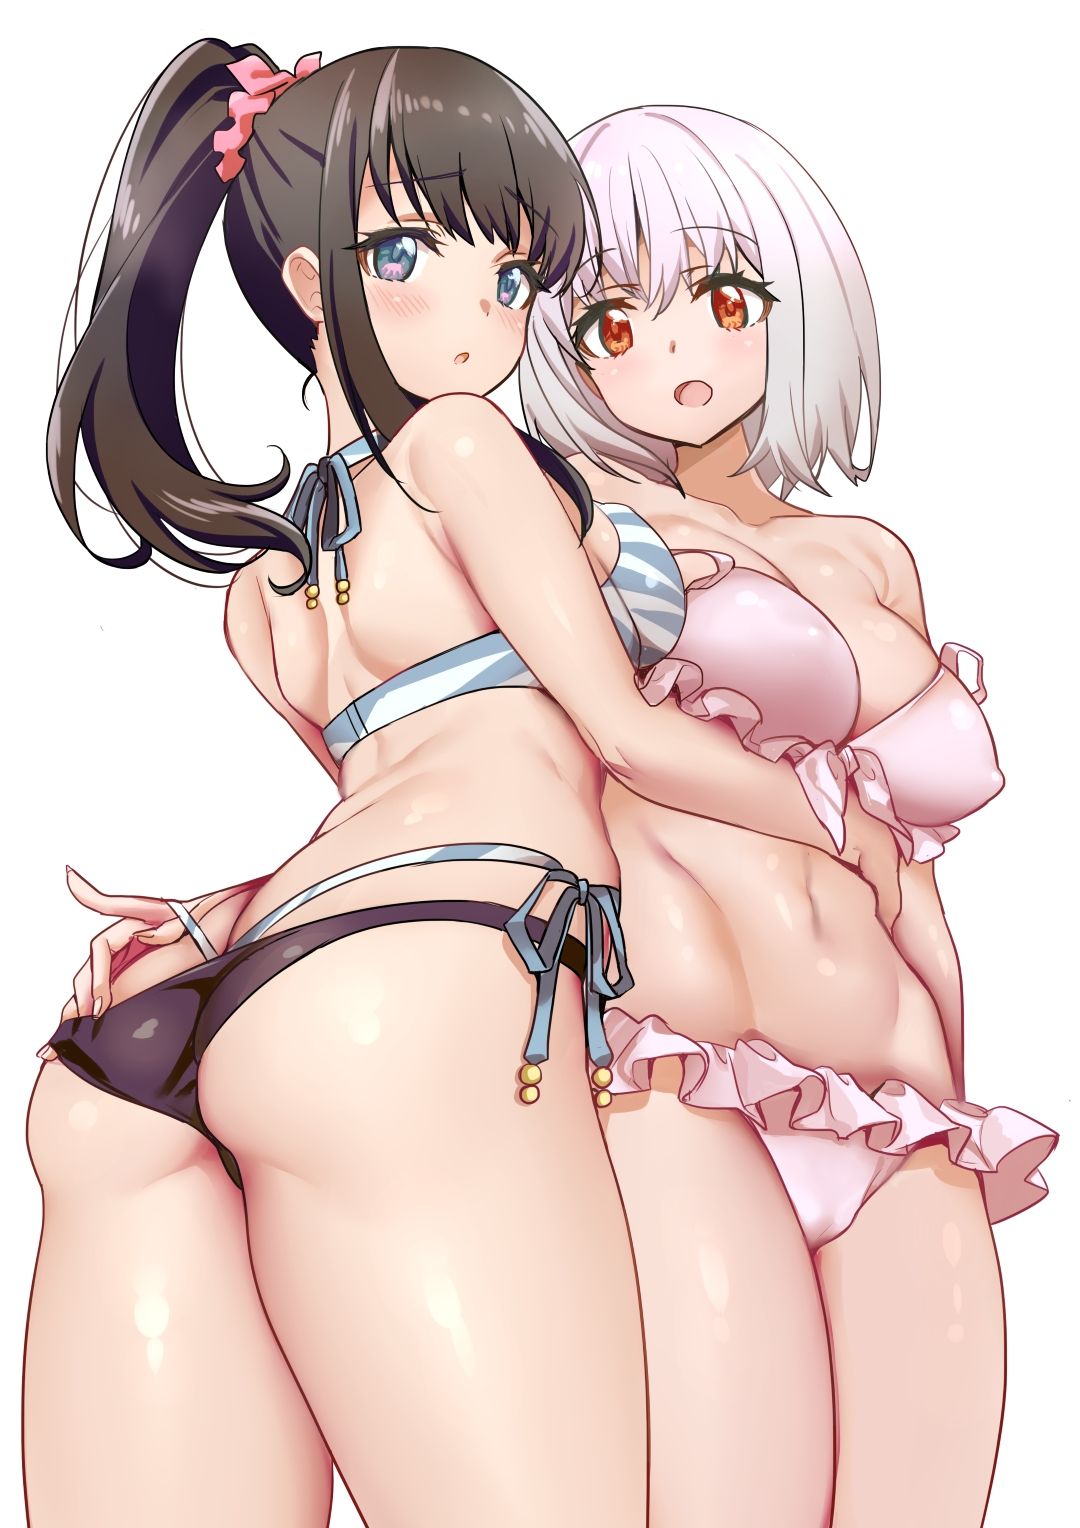 Erotic anime summary erotic images of beautiful girls and beautiful girls with whipy asses [50 sheets] 8